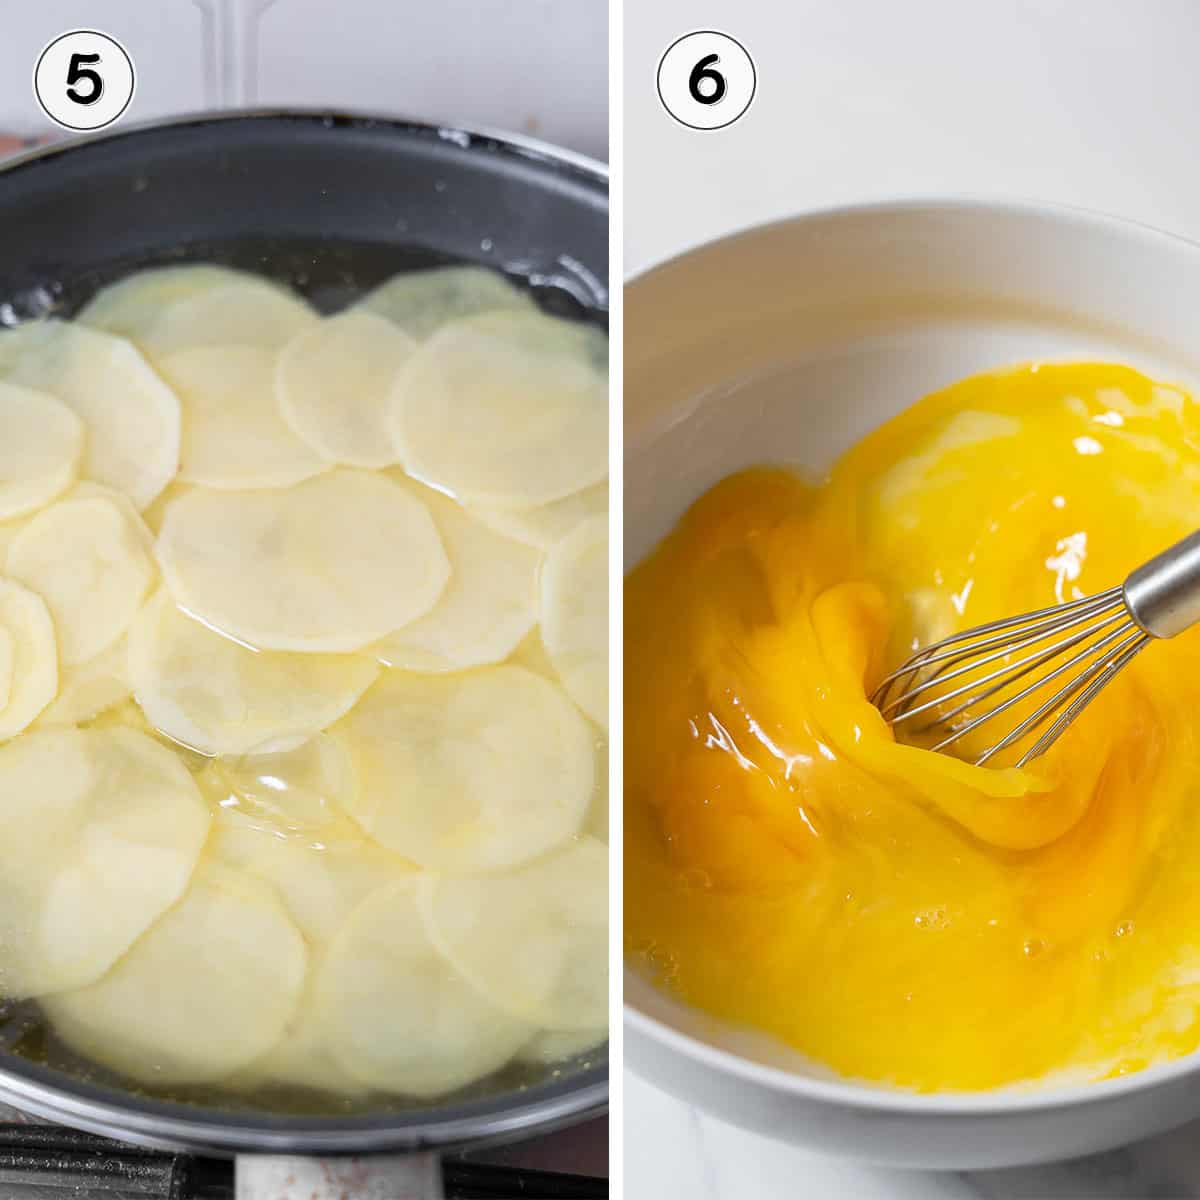 frying the potato slices in oil and whisking the egg.